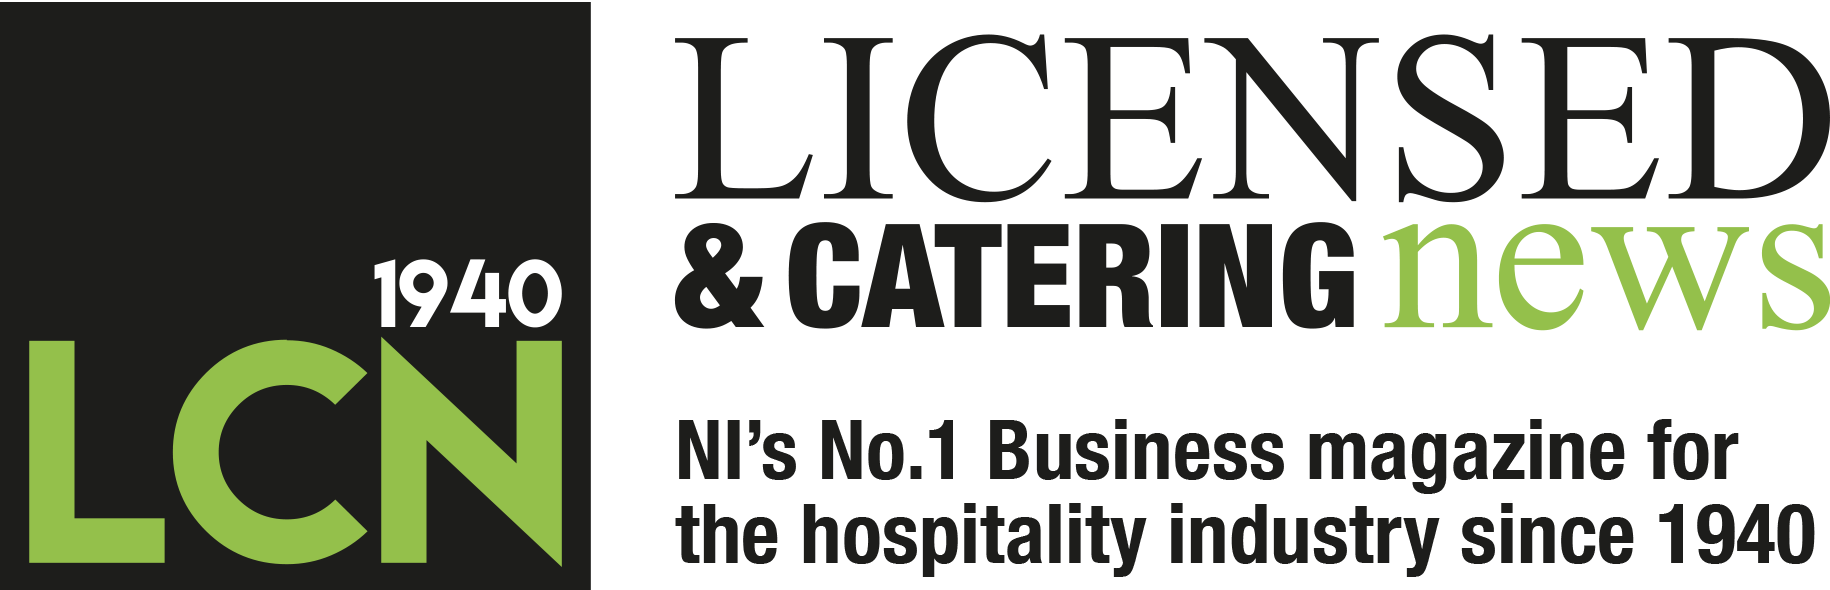 Licensed & Catering News (LCN) – News Coverage from the Local Trade